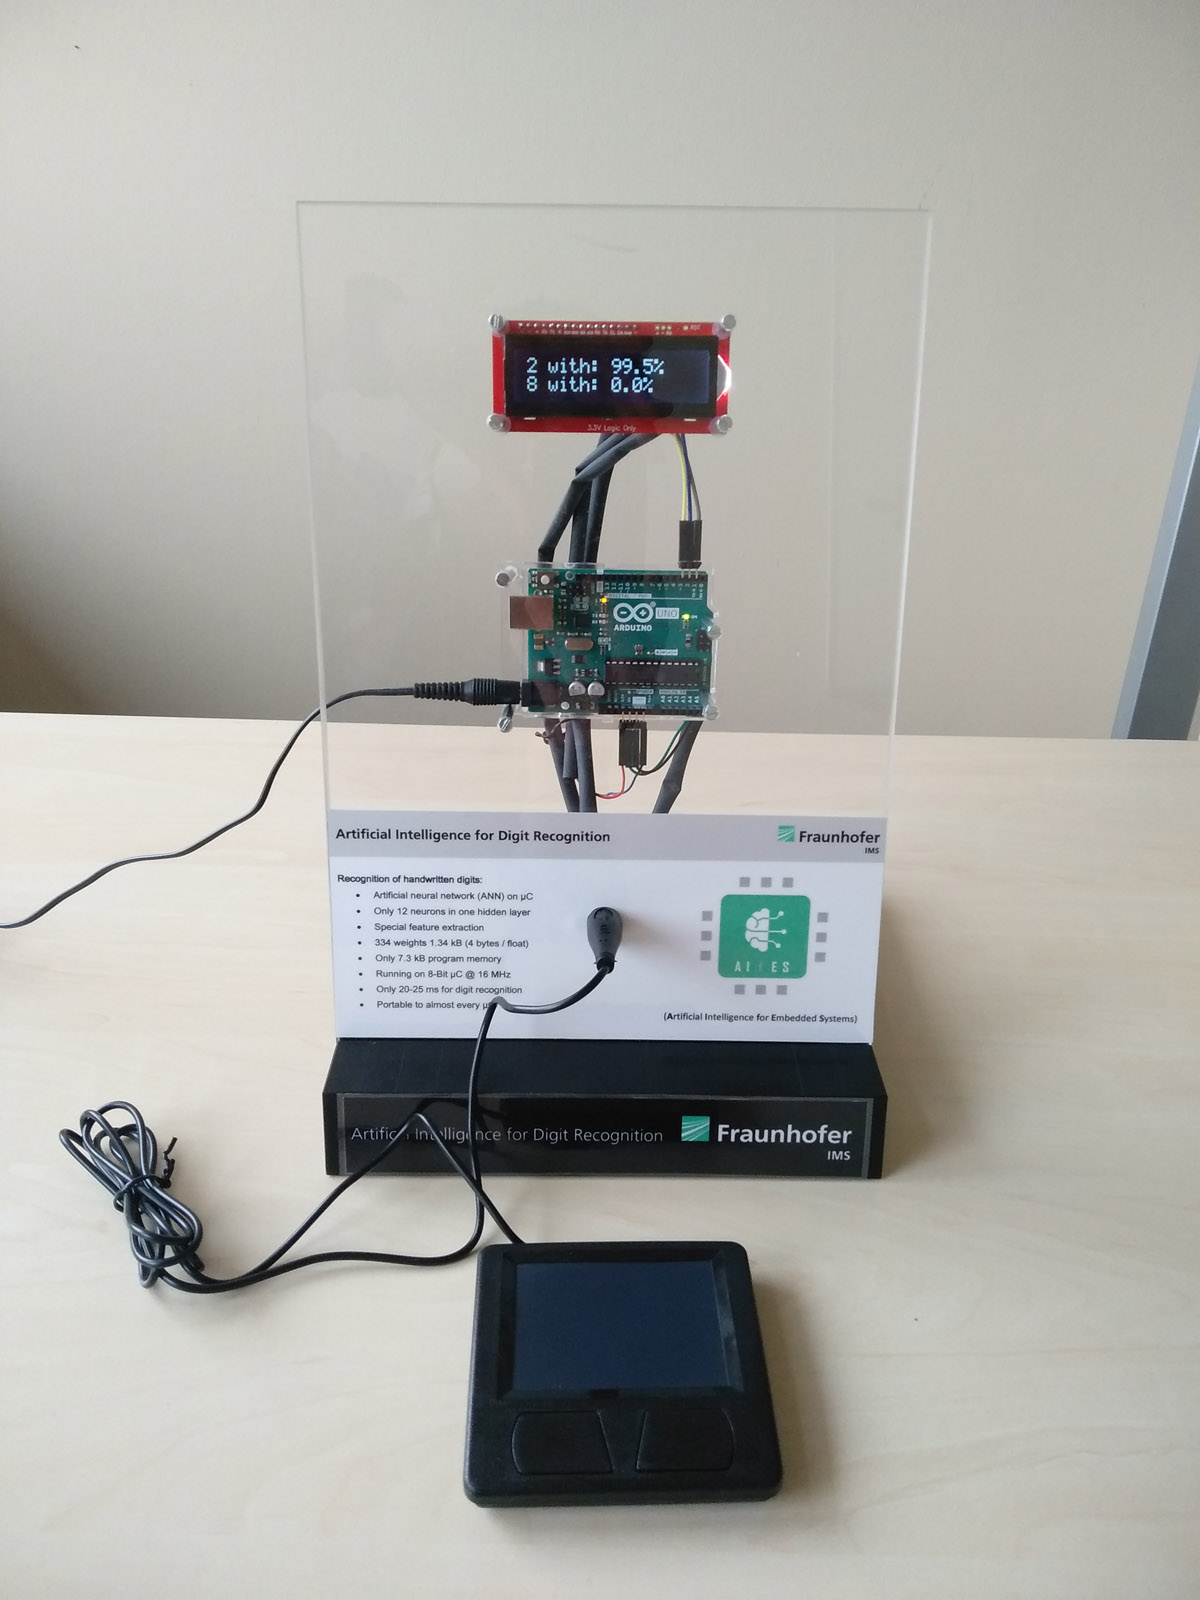 AIfES demonstrator for handwriting recognition. All functions have been integrated on the Arduino UNO, which reads the sensor values of the touchpad, performs number recognition and outputs the result to the display.